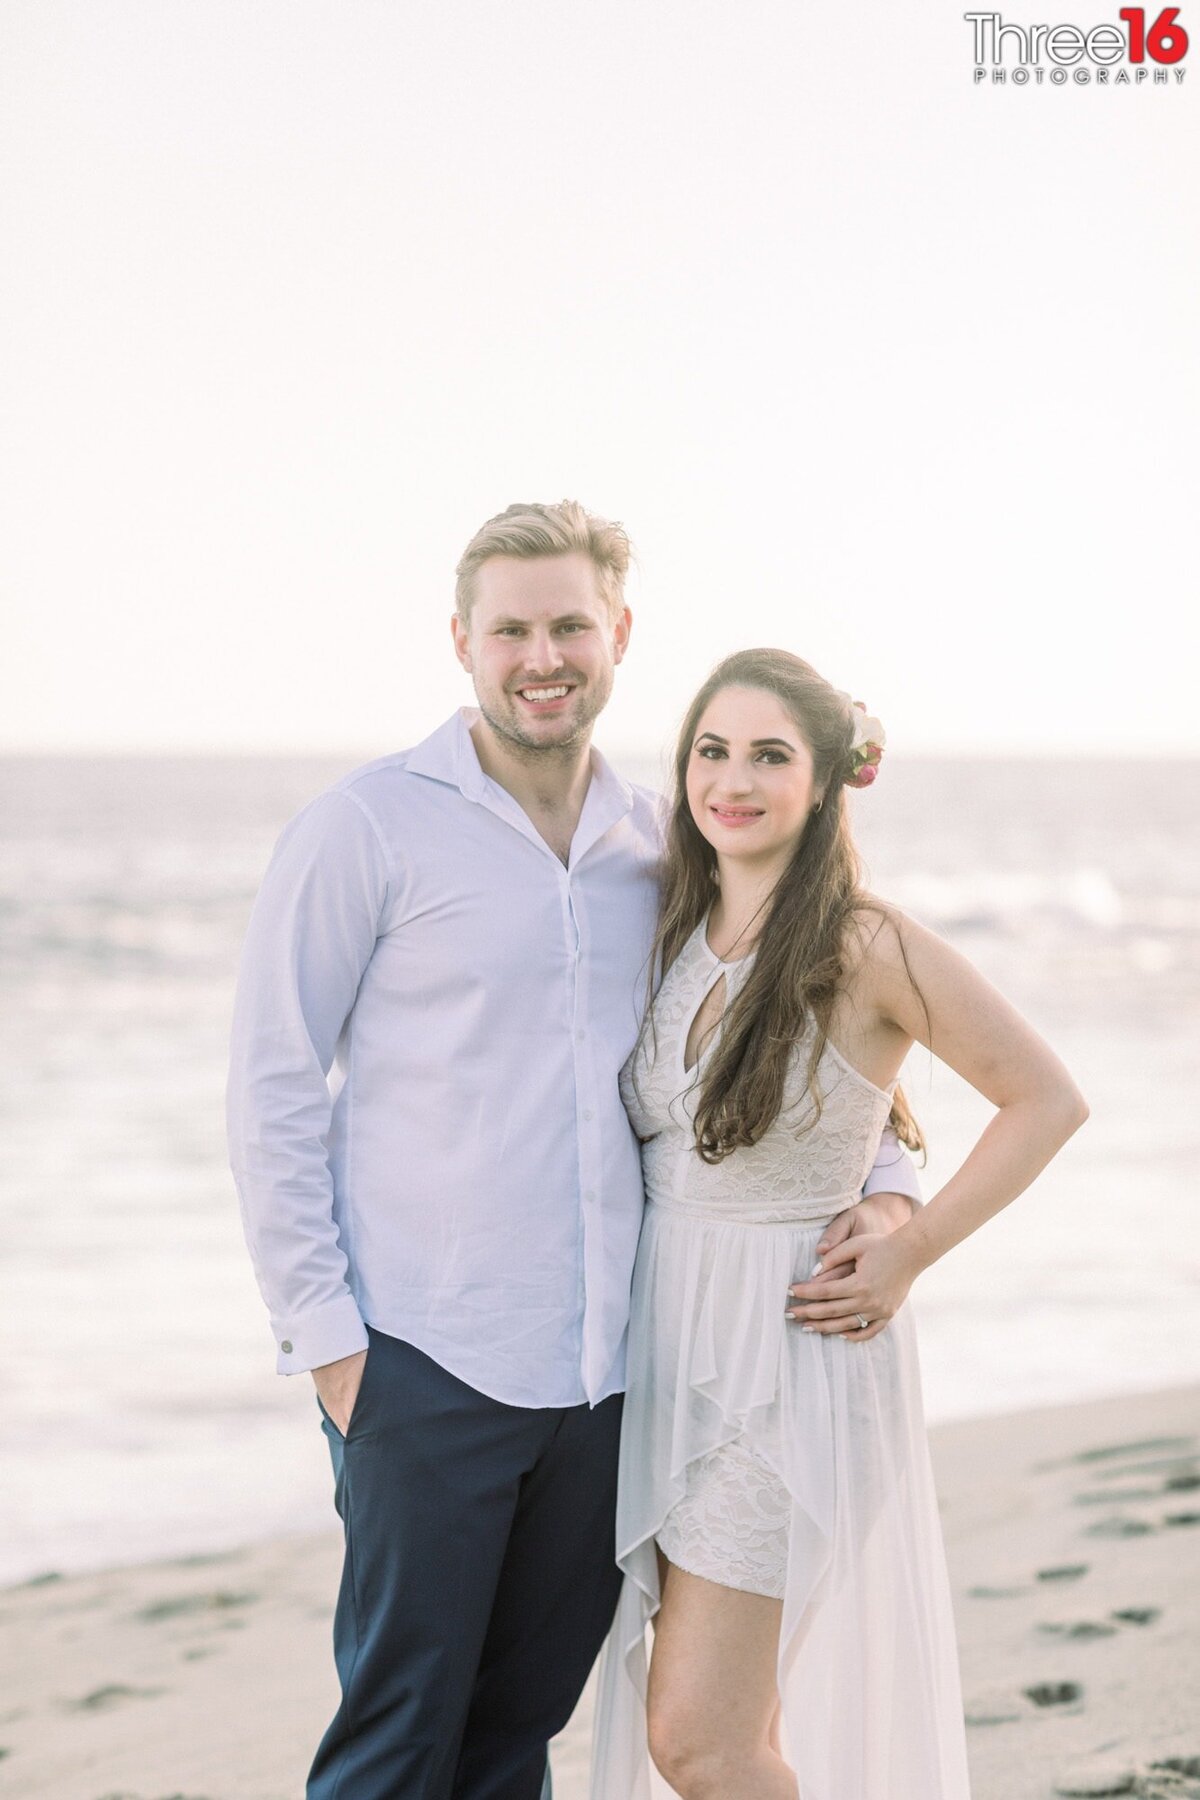 Newly married couple pose for photos after an elopement on the beach